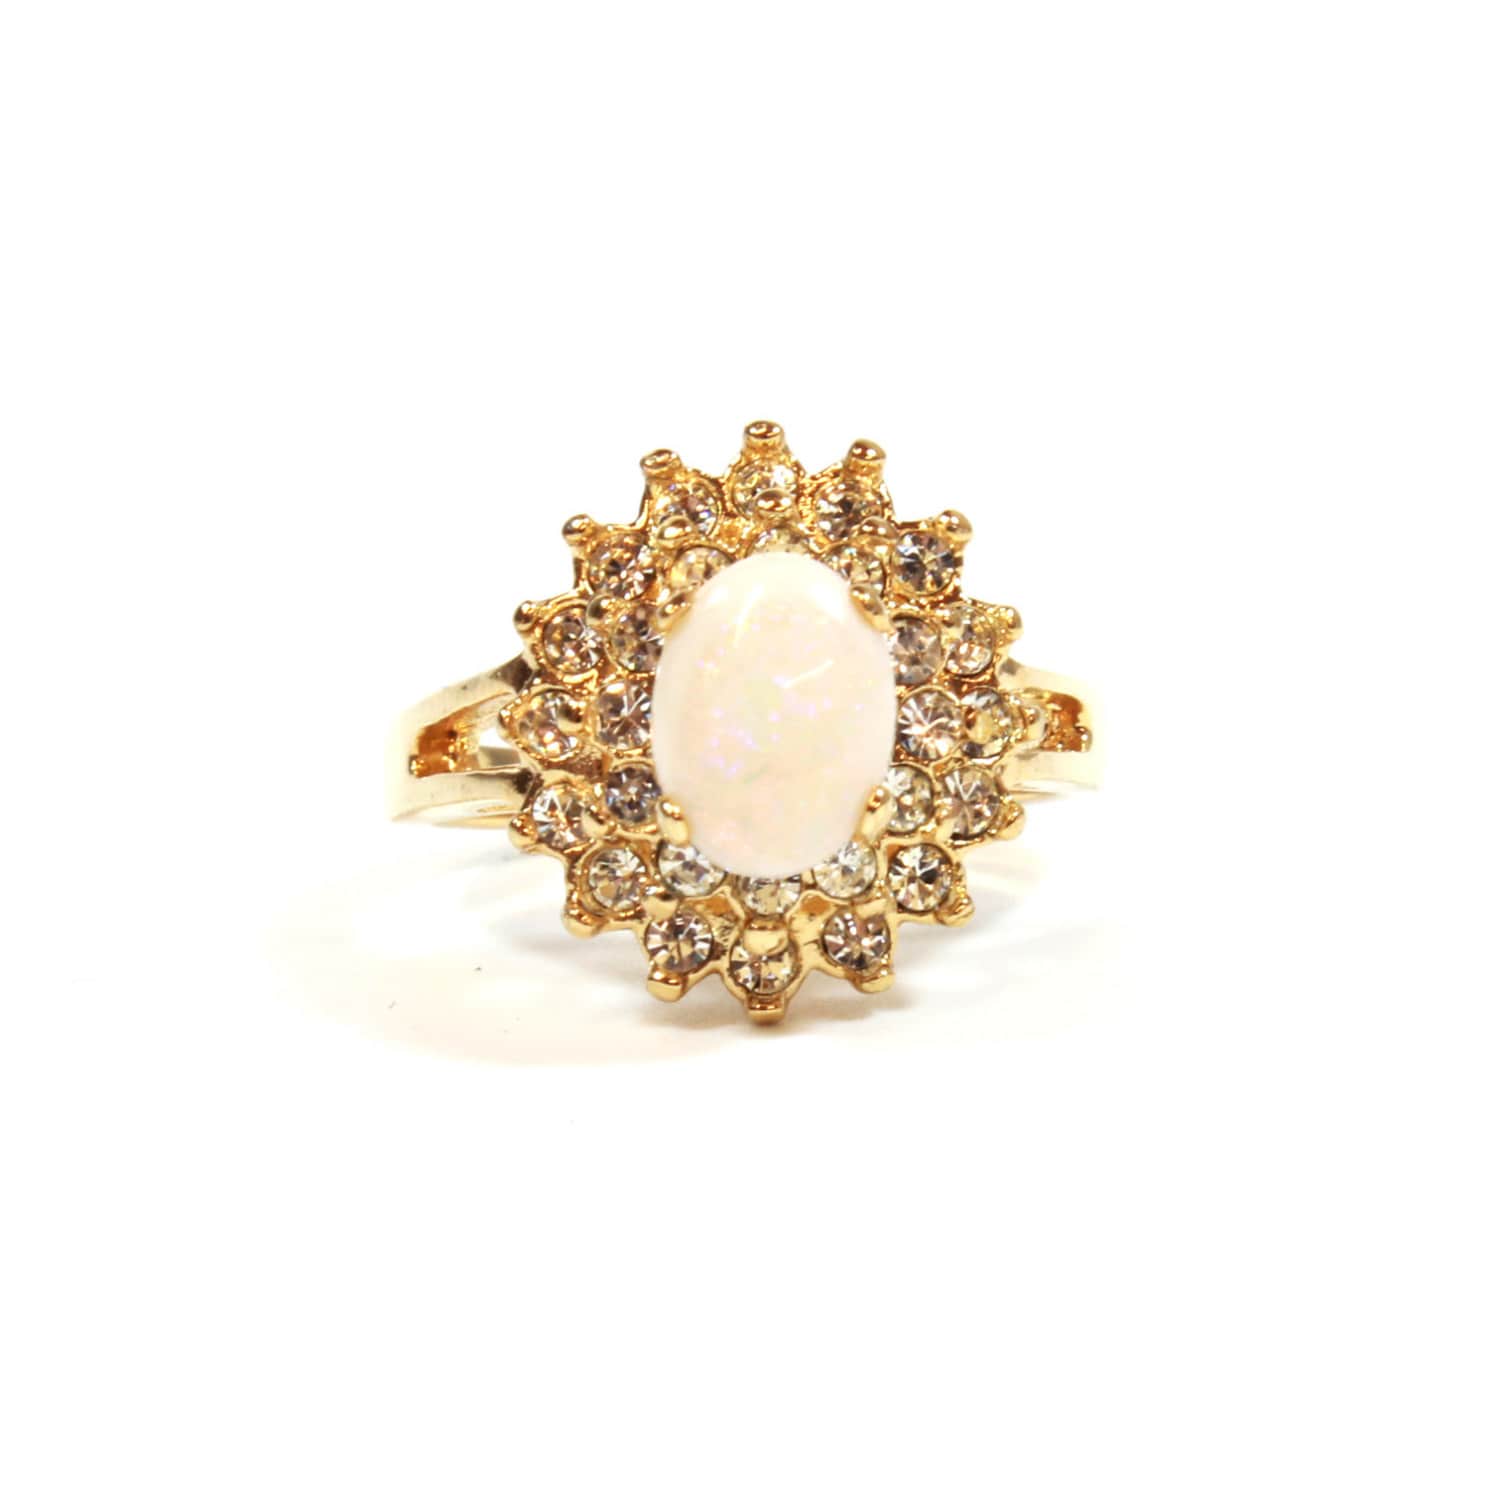 Vintage Ring Genuine Opal with Clear Swarovski Crystals 18k Gold Cocktail Ring Antique Womans Jewelry #R1352 - Limited Stock - Never Worn